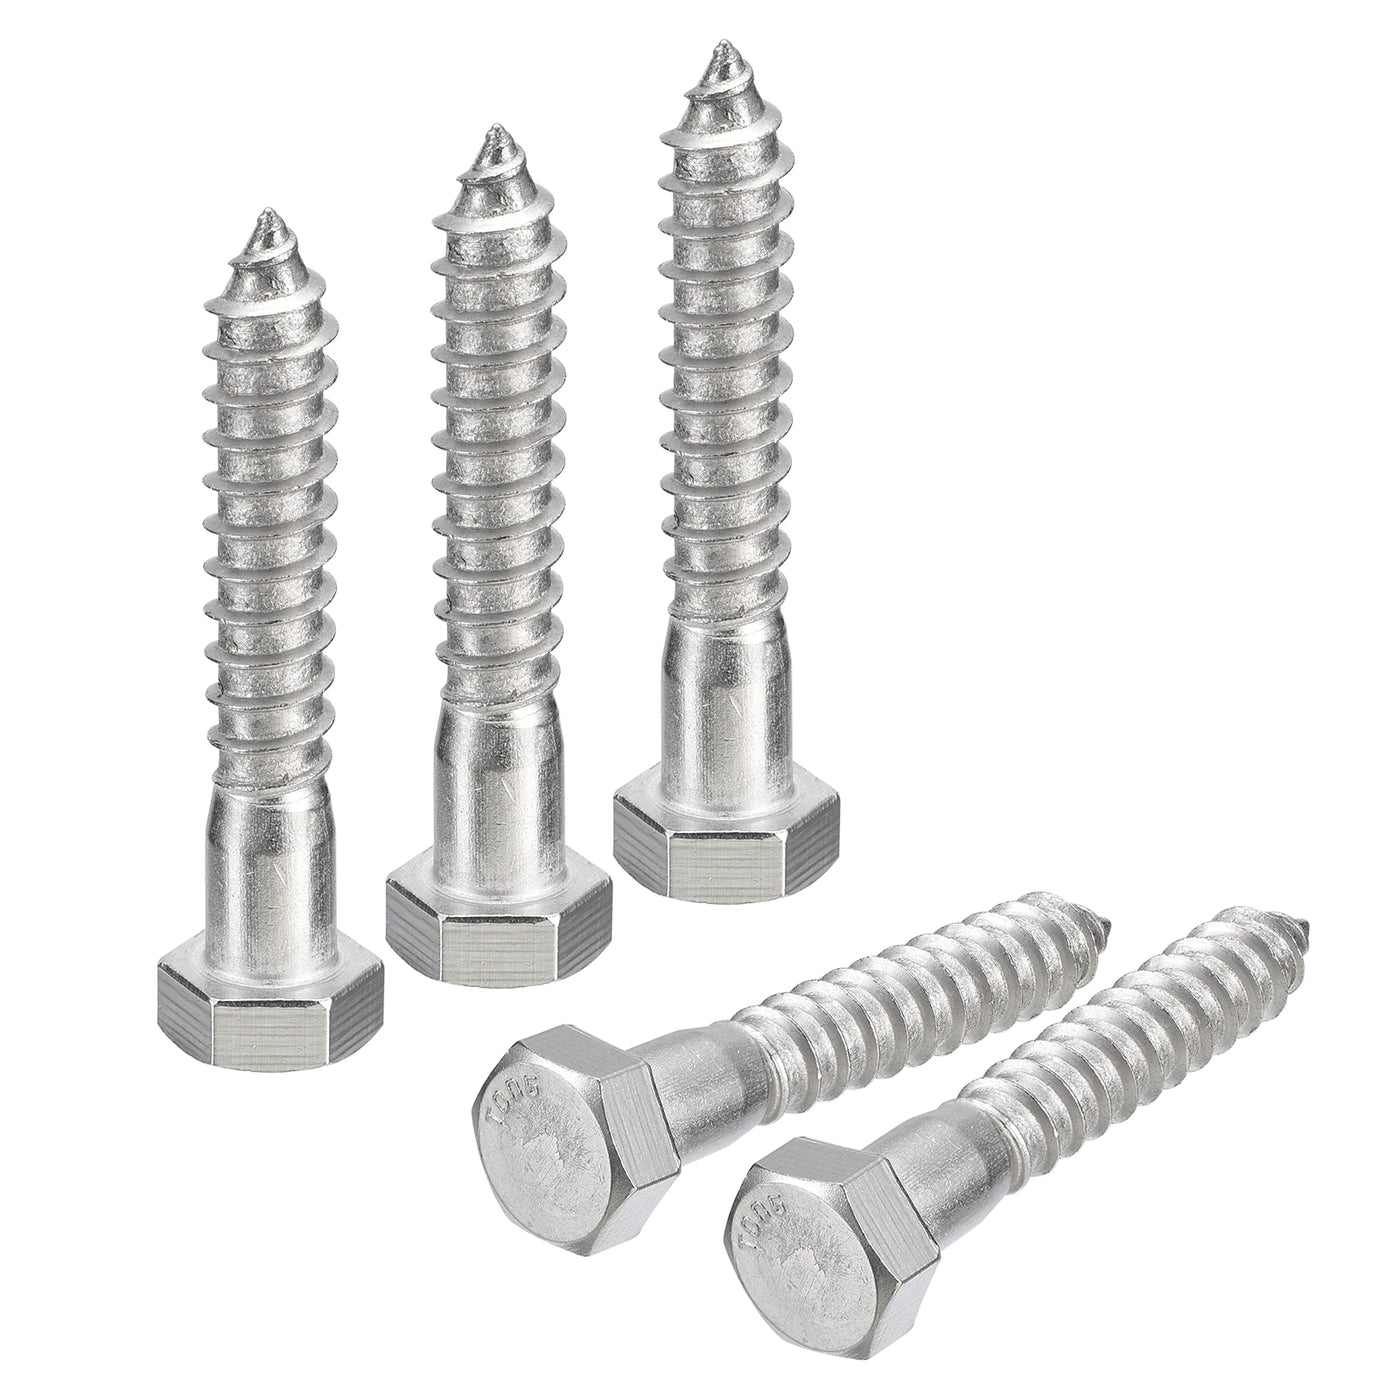 uxcell Uxcell Hex Head Lag Screws Bolts, 5pcs 1/2" x 3" 304 Stainless Steel Wood Screws